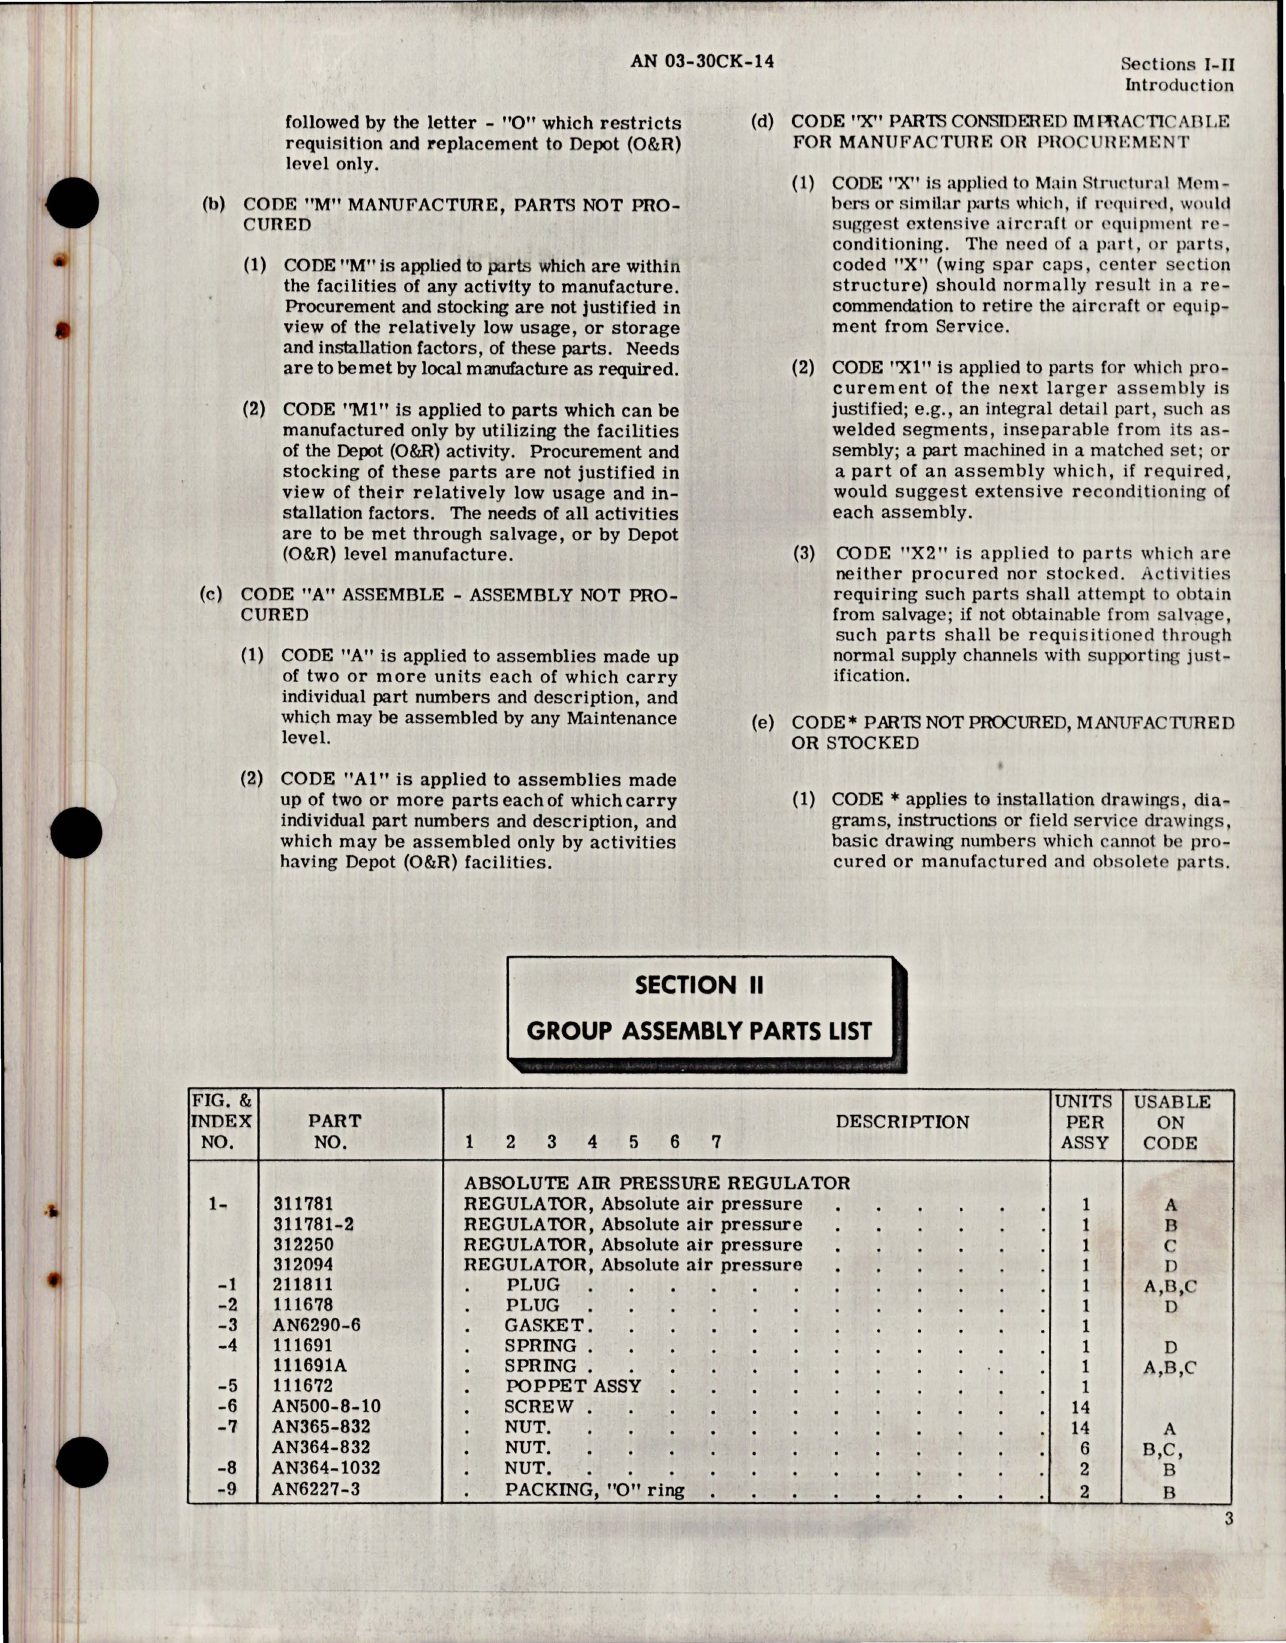 Sample page 5 from AirCorps Library document: Illustrated Parts Breakdown for Air Pressure Regulator 